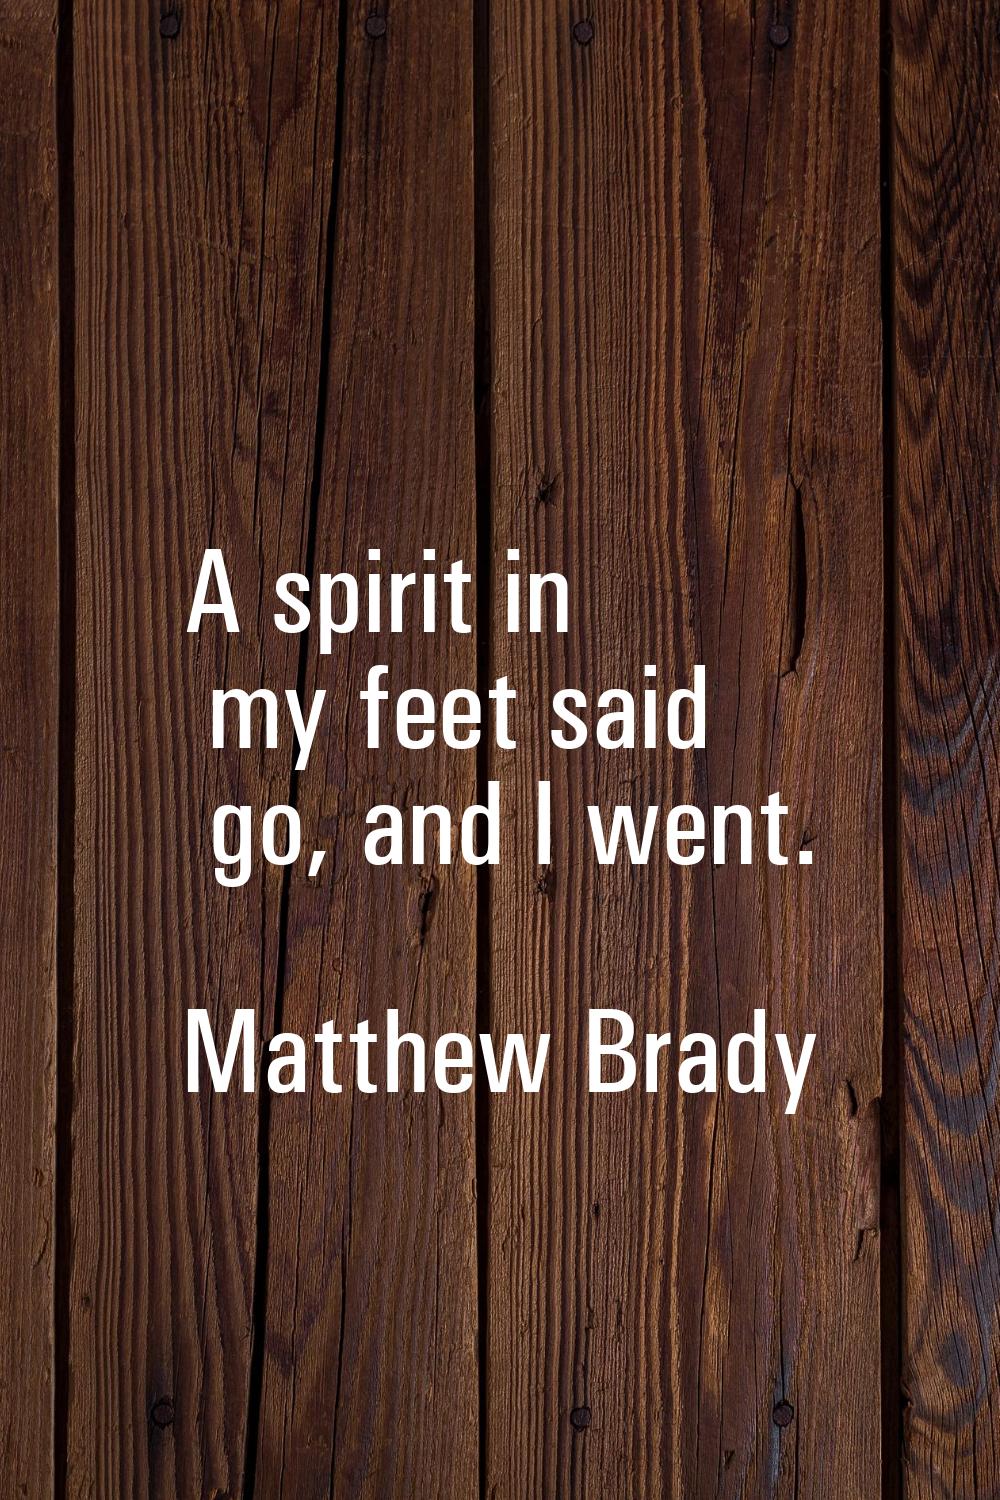 A spirit in my feet said go, and I went.